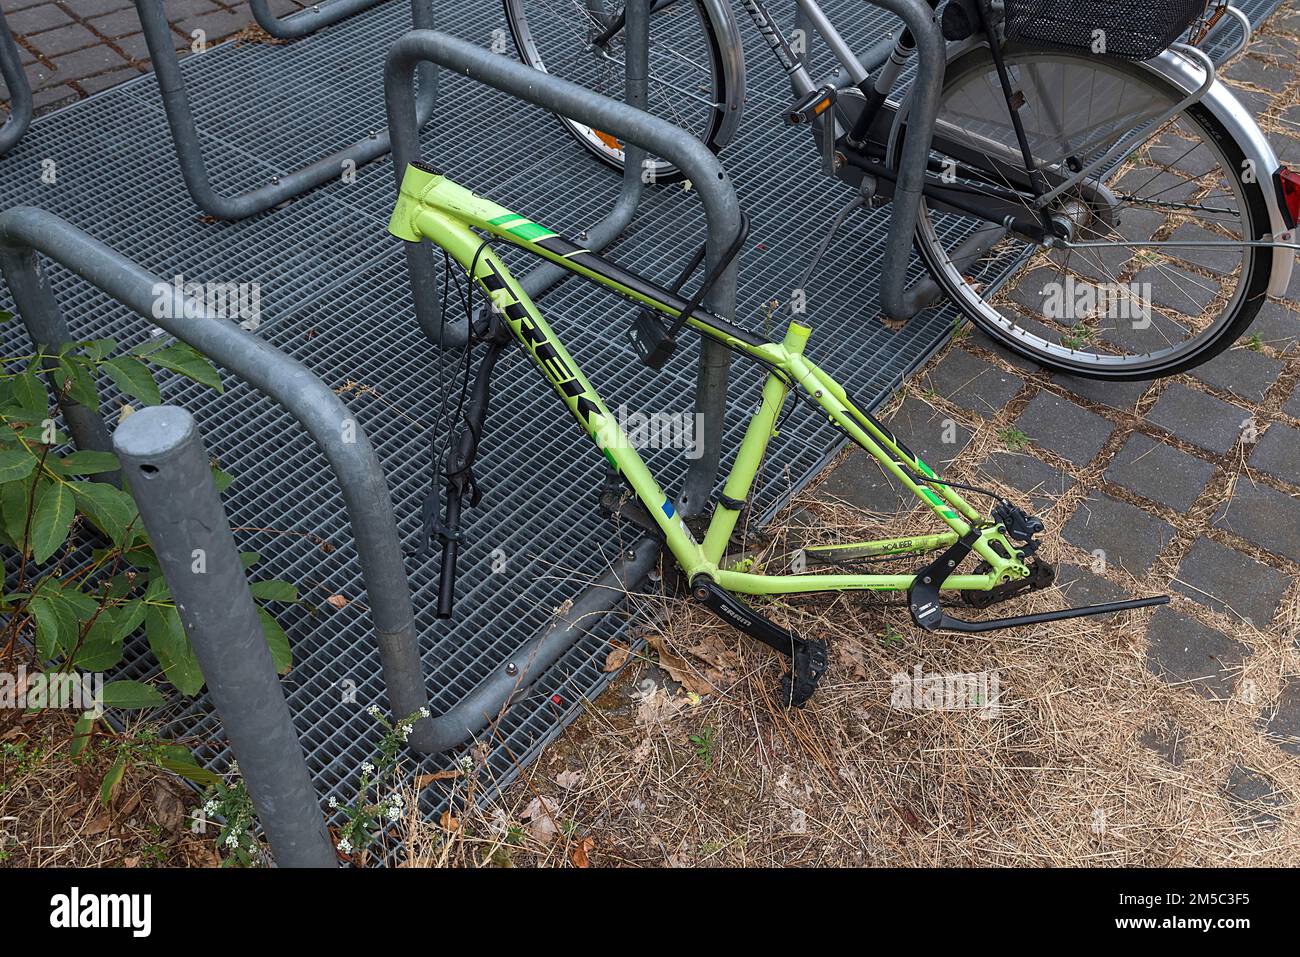 Bicycle theft, Theft, Stolen parts of a bicycle on a bicycle stand, Bavaria, Germany Stock Photo